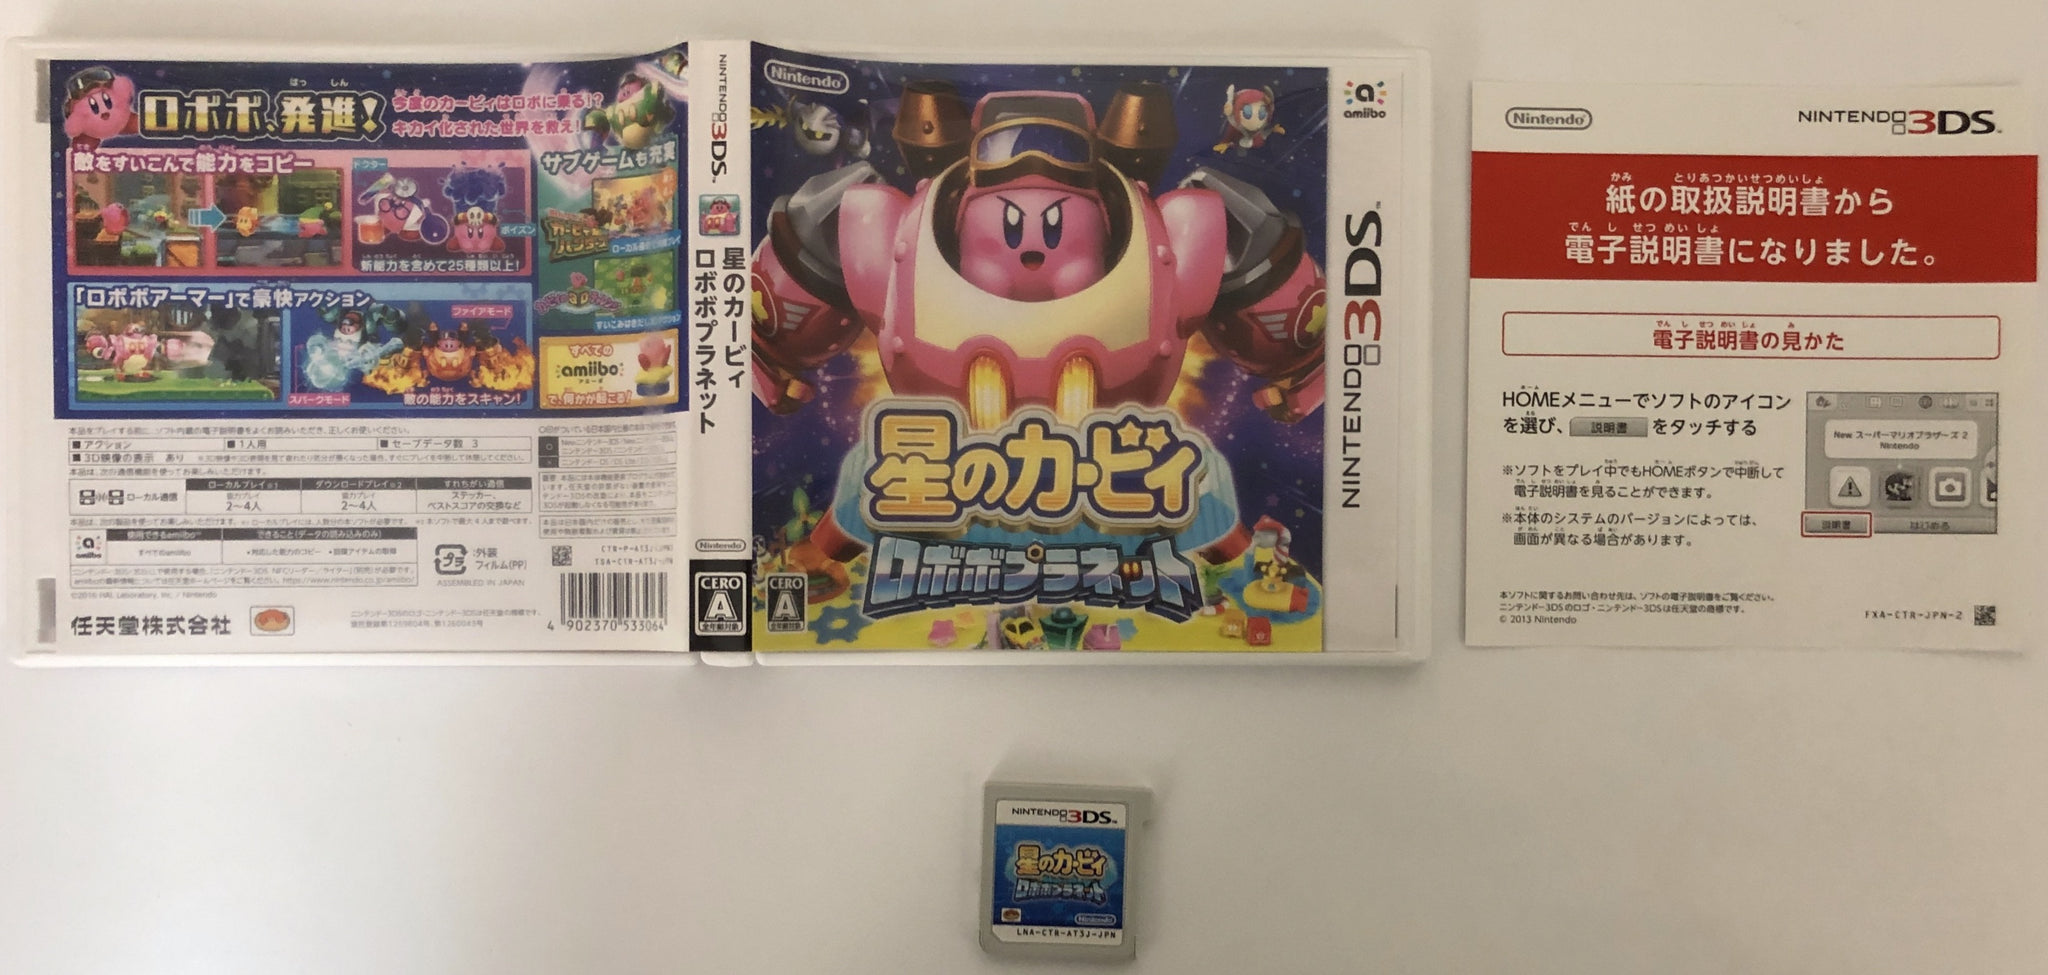 Nintendo 2DS 3DS JP Game:  "Hoshi no Kirby: Robobo Planet" USED